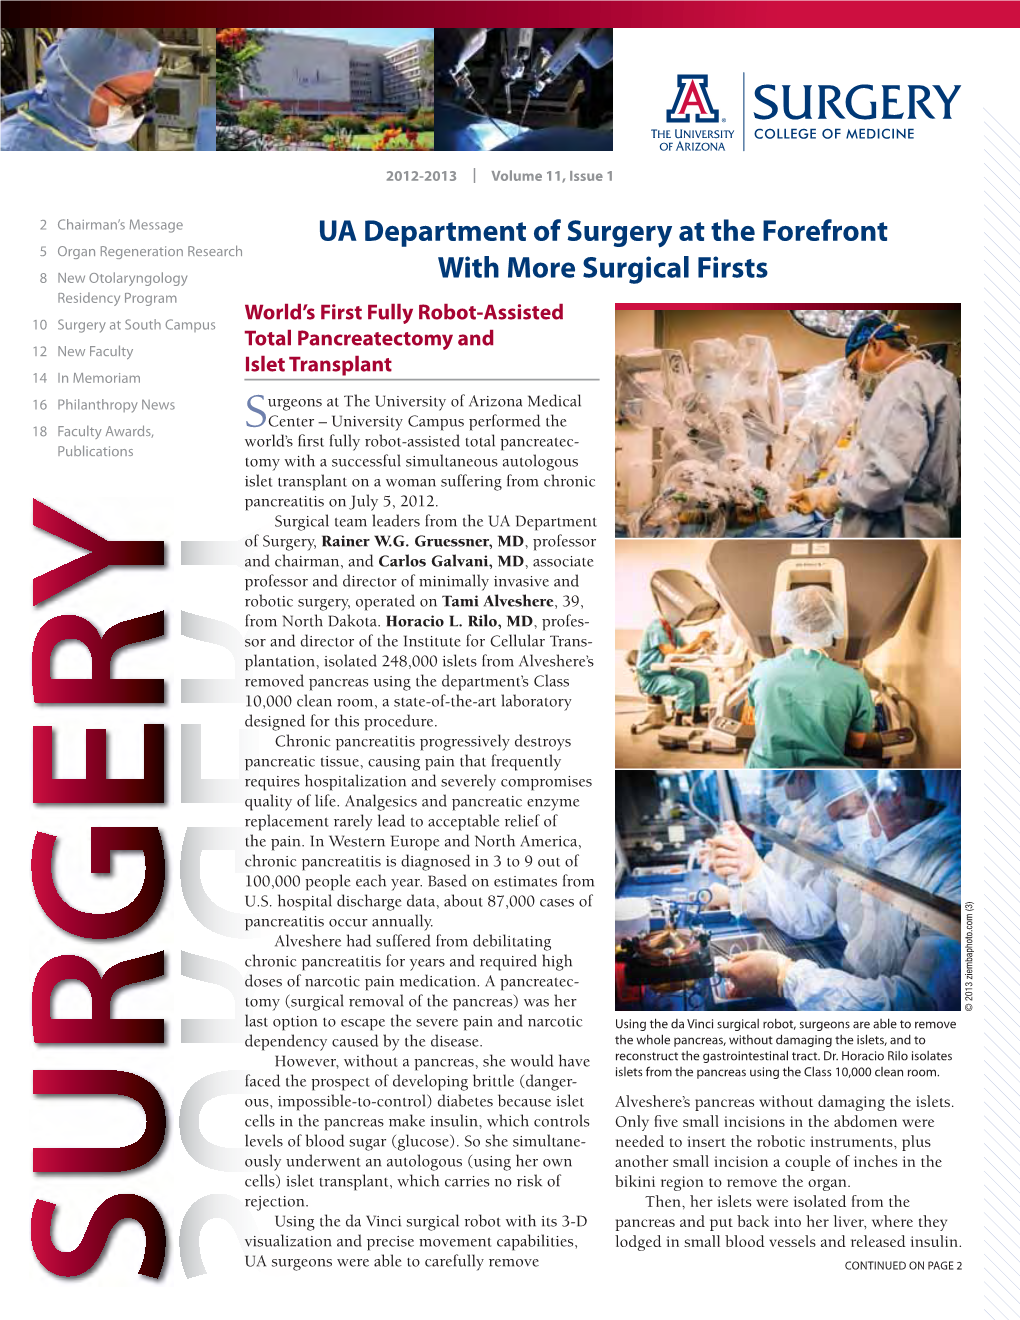 UA Department of Surgery at the Forefront with More Surgical Firsts